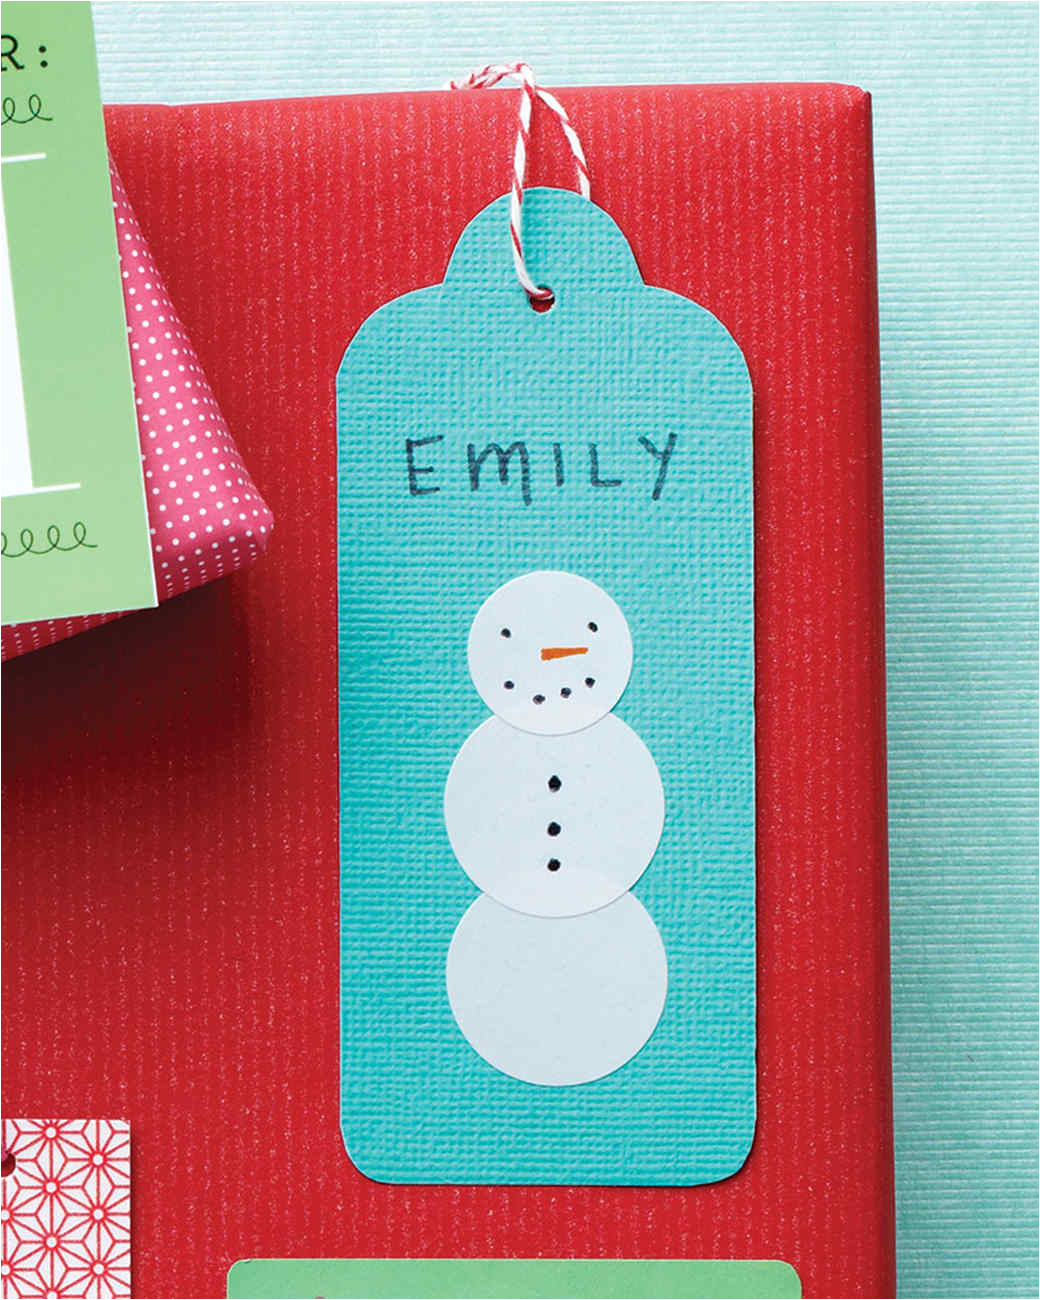 holiday gift tags and labels